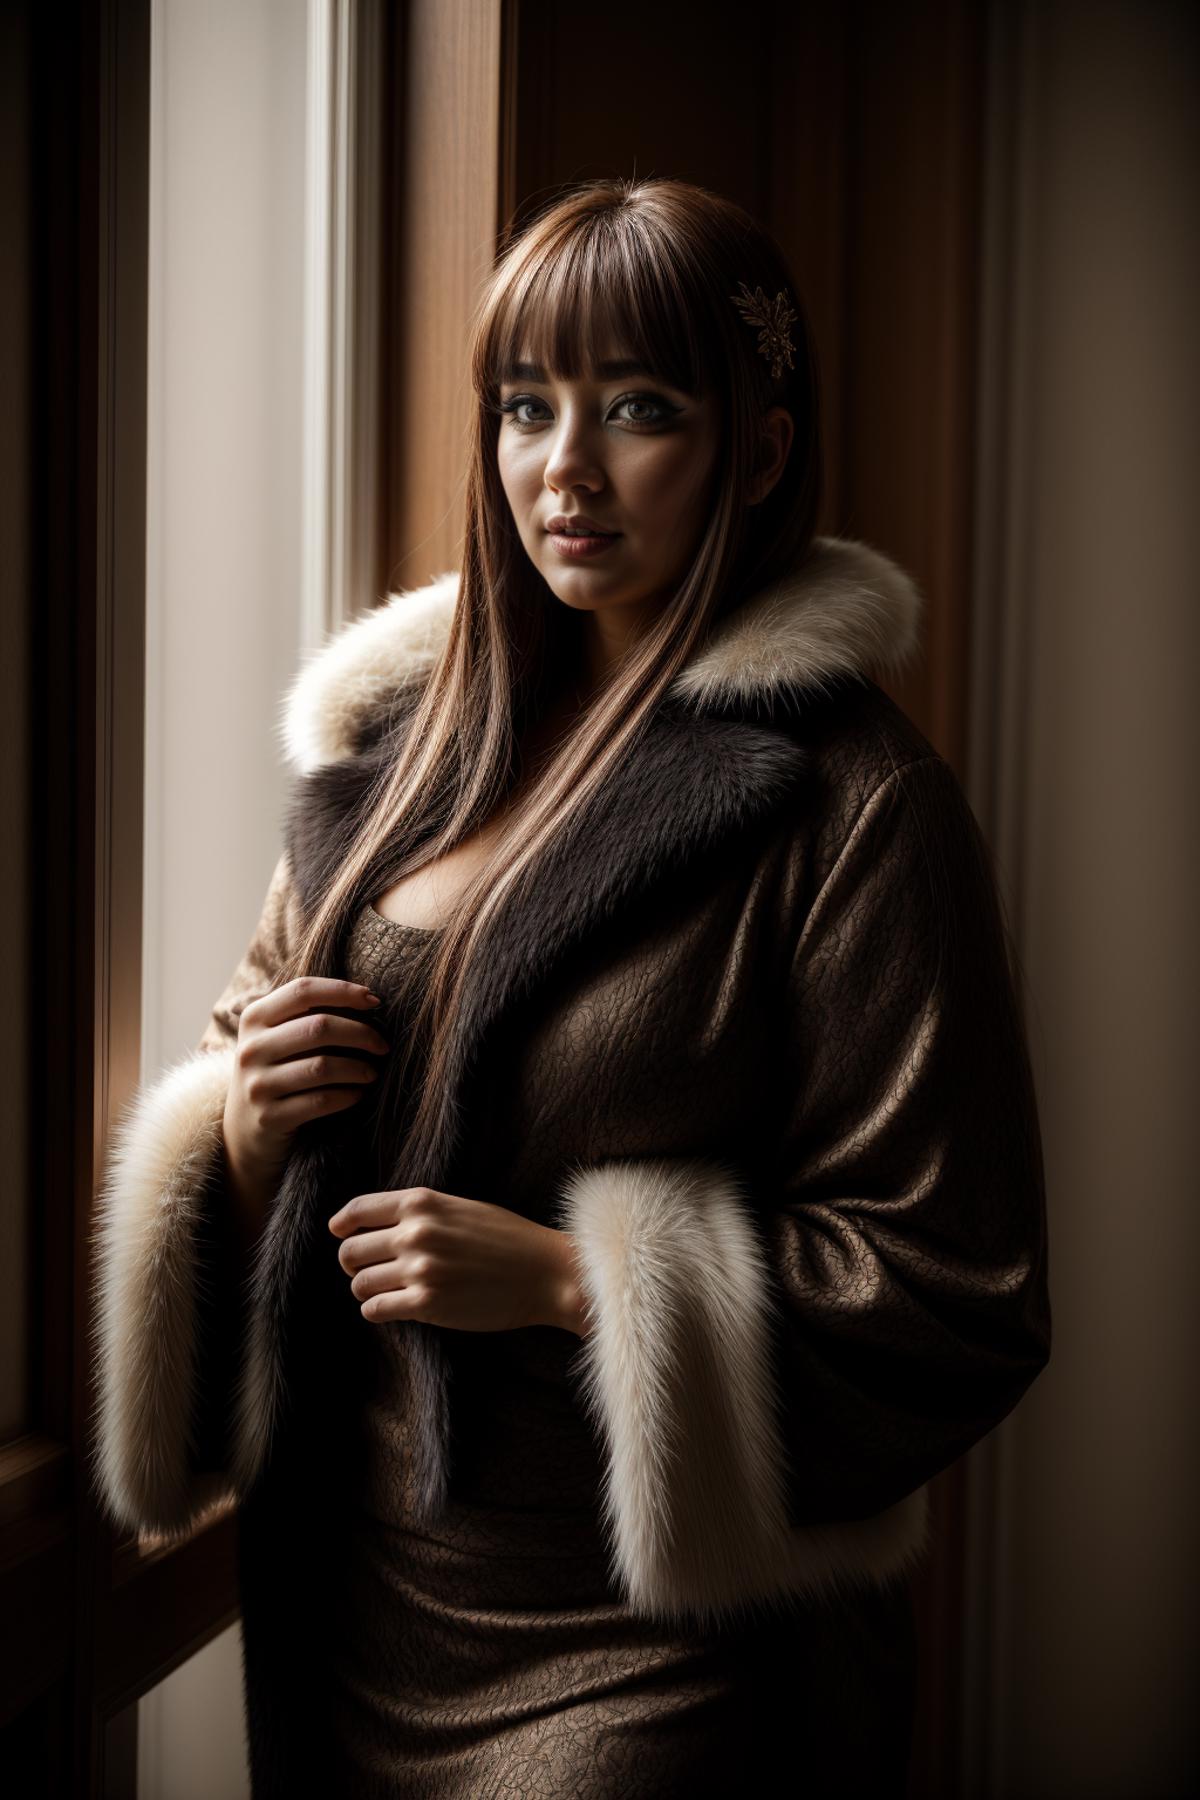 A woman wearing a fur coat with a fur trimmed hood stands in front of a window.